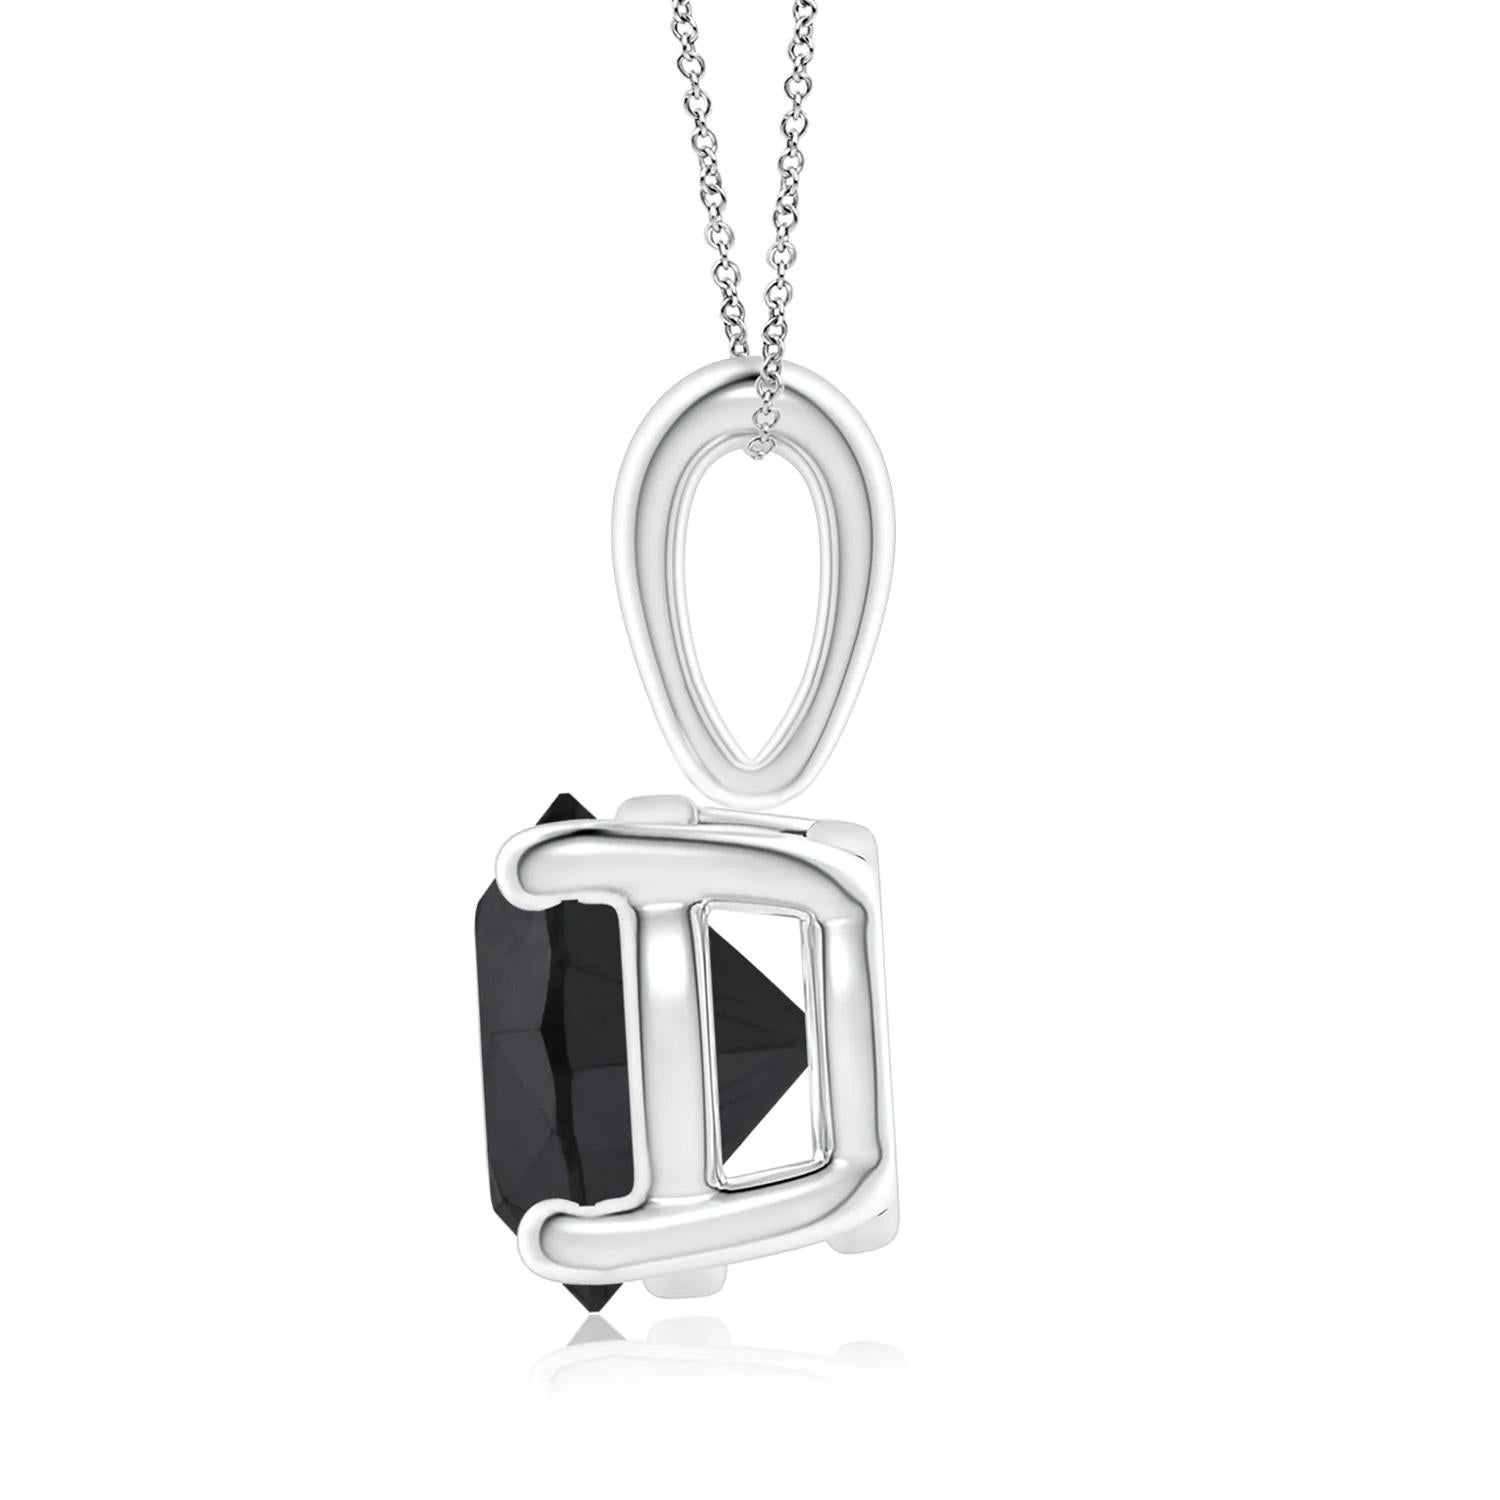 Surprise a special woman in your life with this breathtaking, statement hand crafted solitaire black diamond necklace. This eye-catching pendant necklace features a 1.64 carat round cut black diamond, measuring 6.60 x 6.58 x 5.38 mm set in 14k white